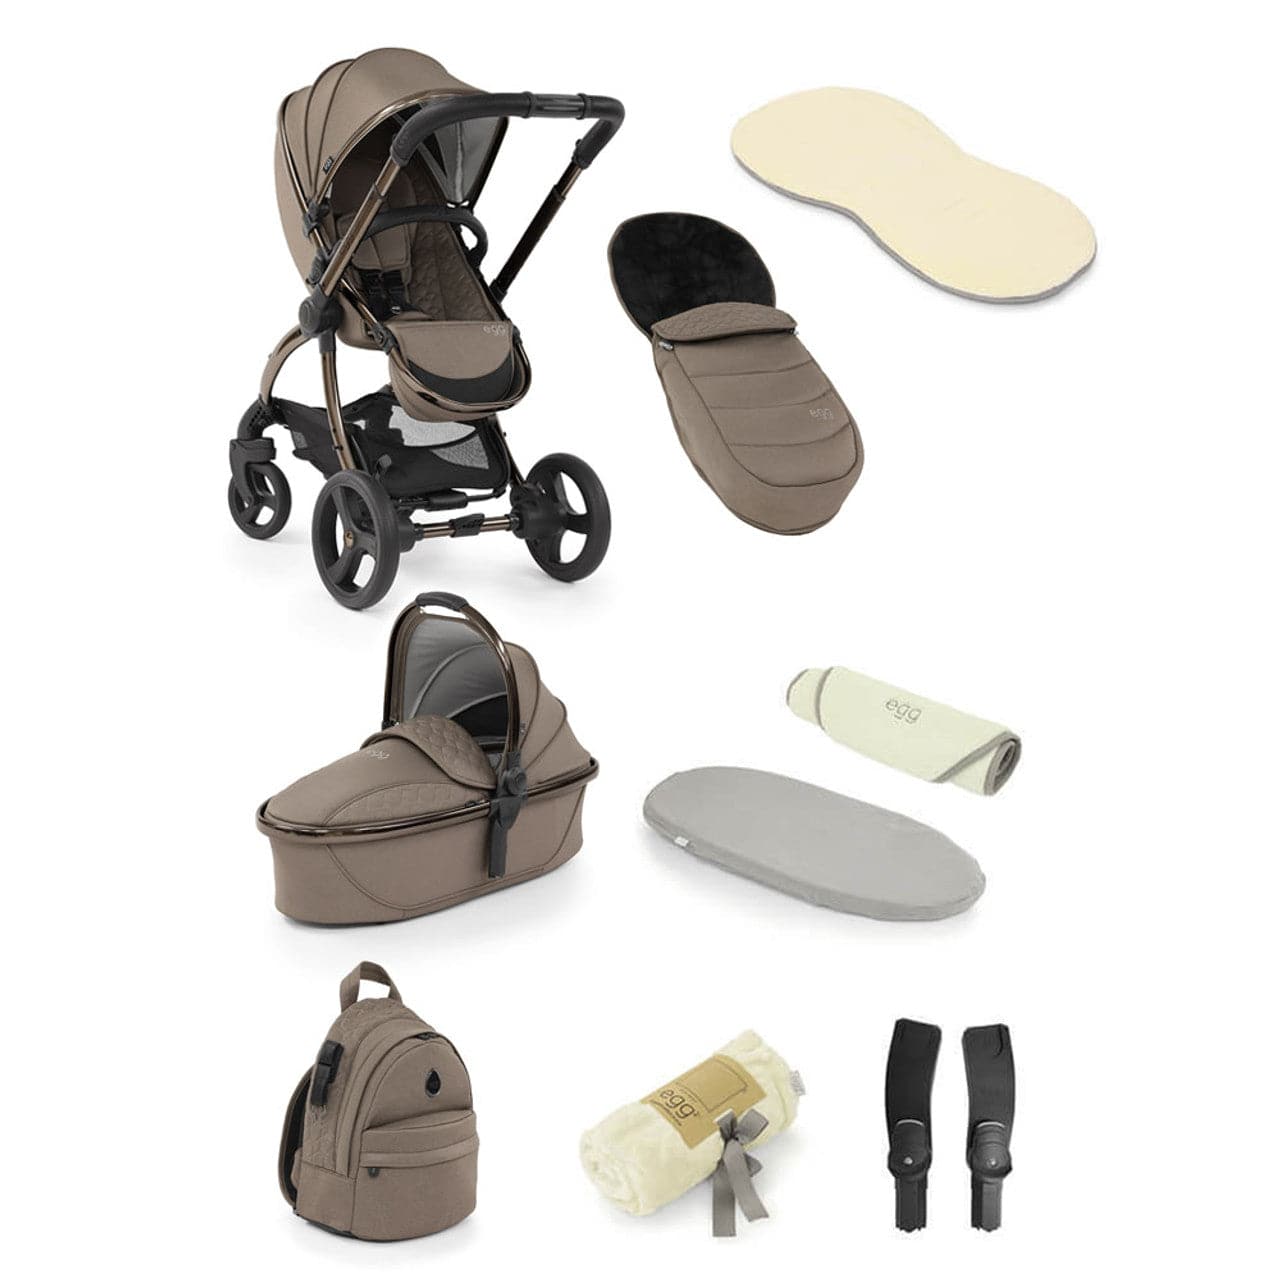 Egg® 2 Snuggle Pushchair Package - Mink - For Your Little One